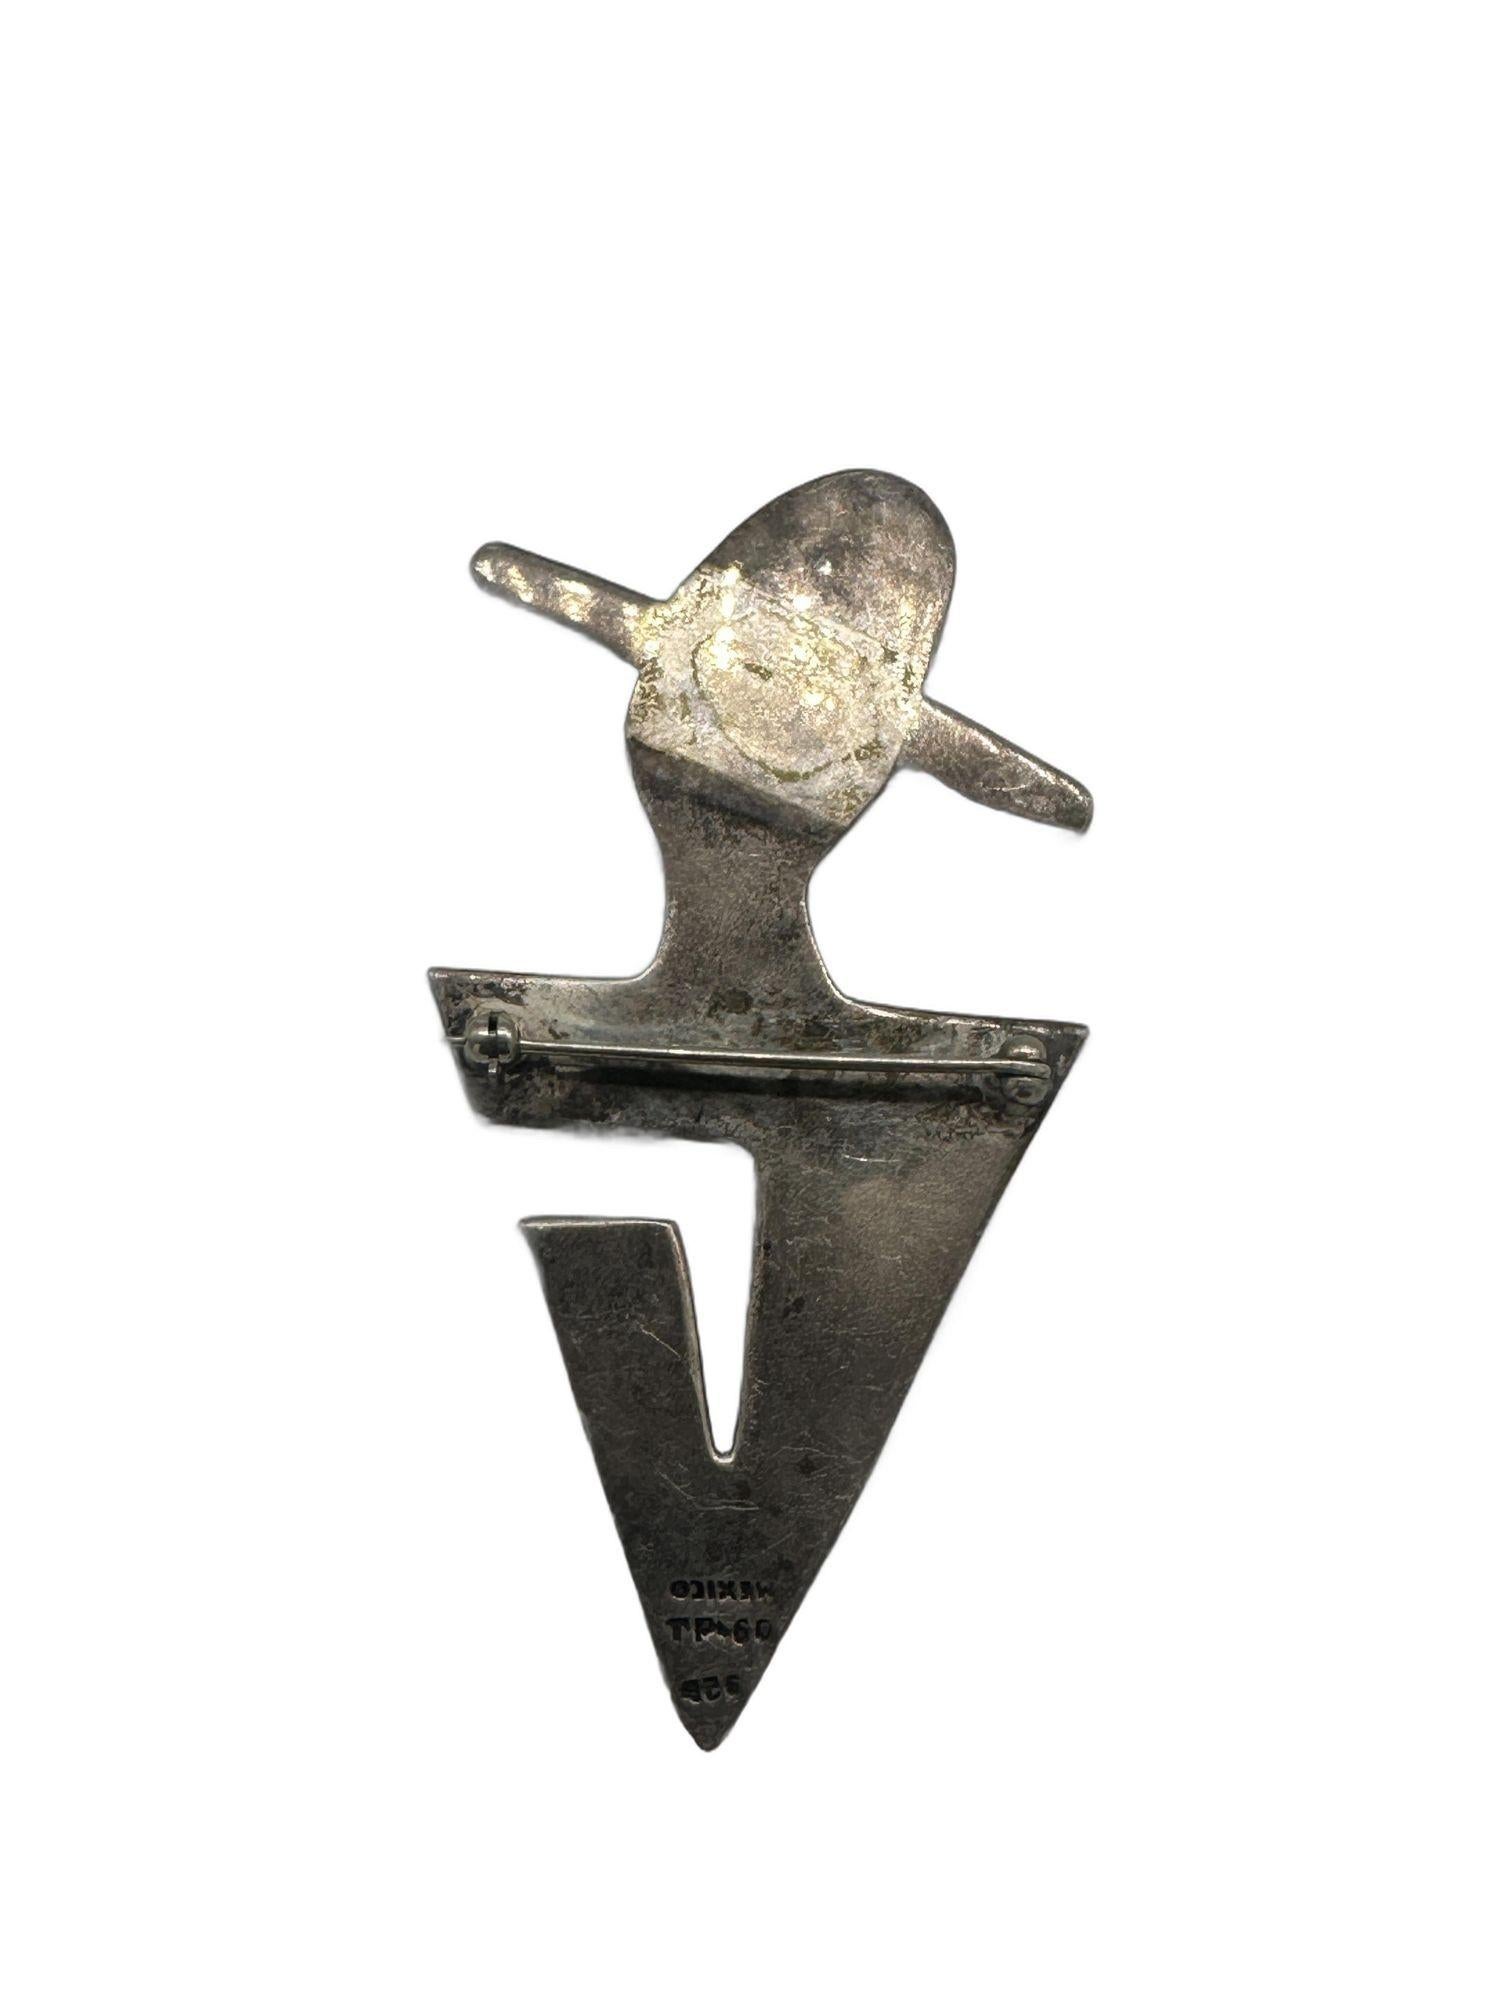 This is a vintage brooch pin crafted from 925 sterling silver, depicting a lady wearing a hat. The brooch also features the letter 